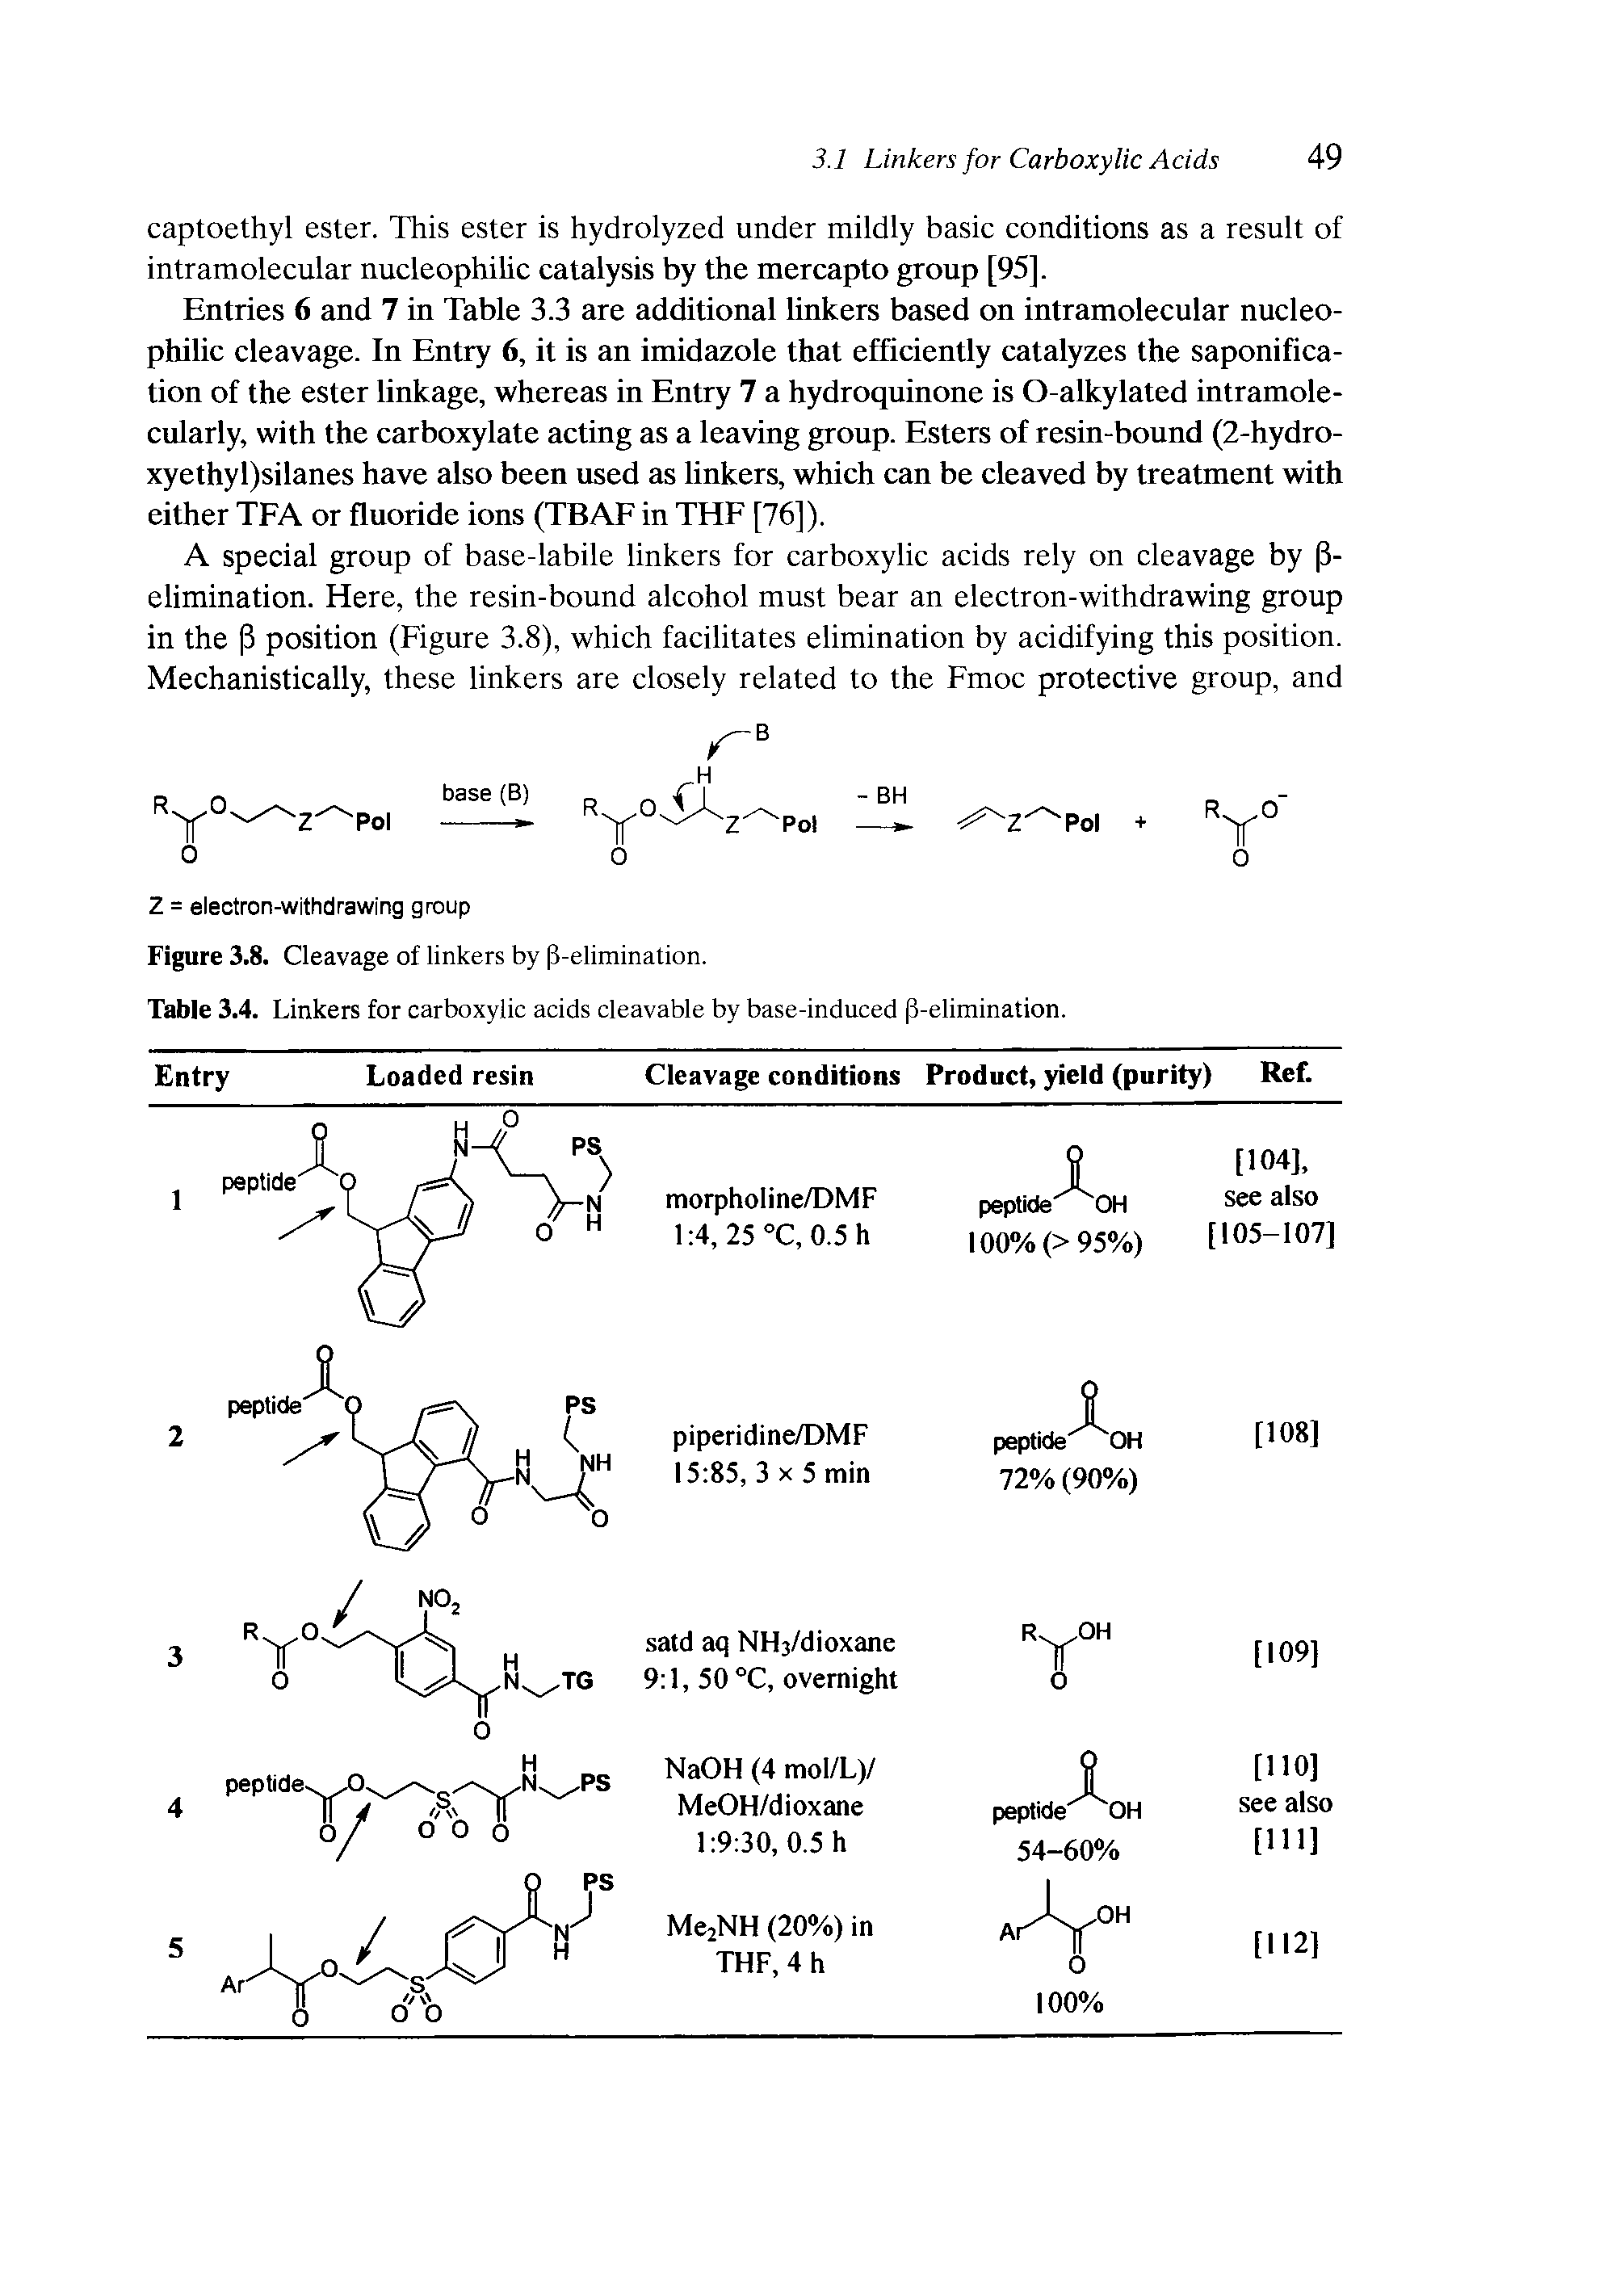 Table 3.4. Linkers for carboxylic acids cleavable by base-induced (3-elimination.